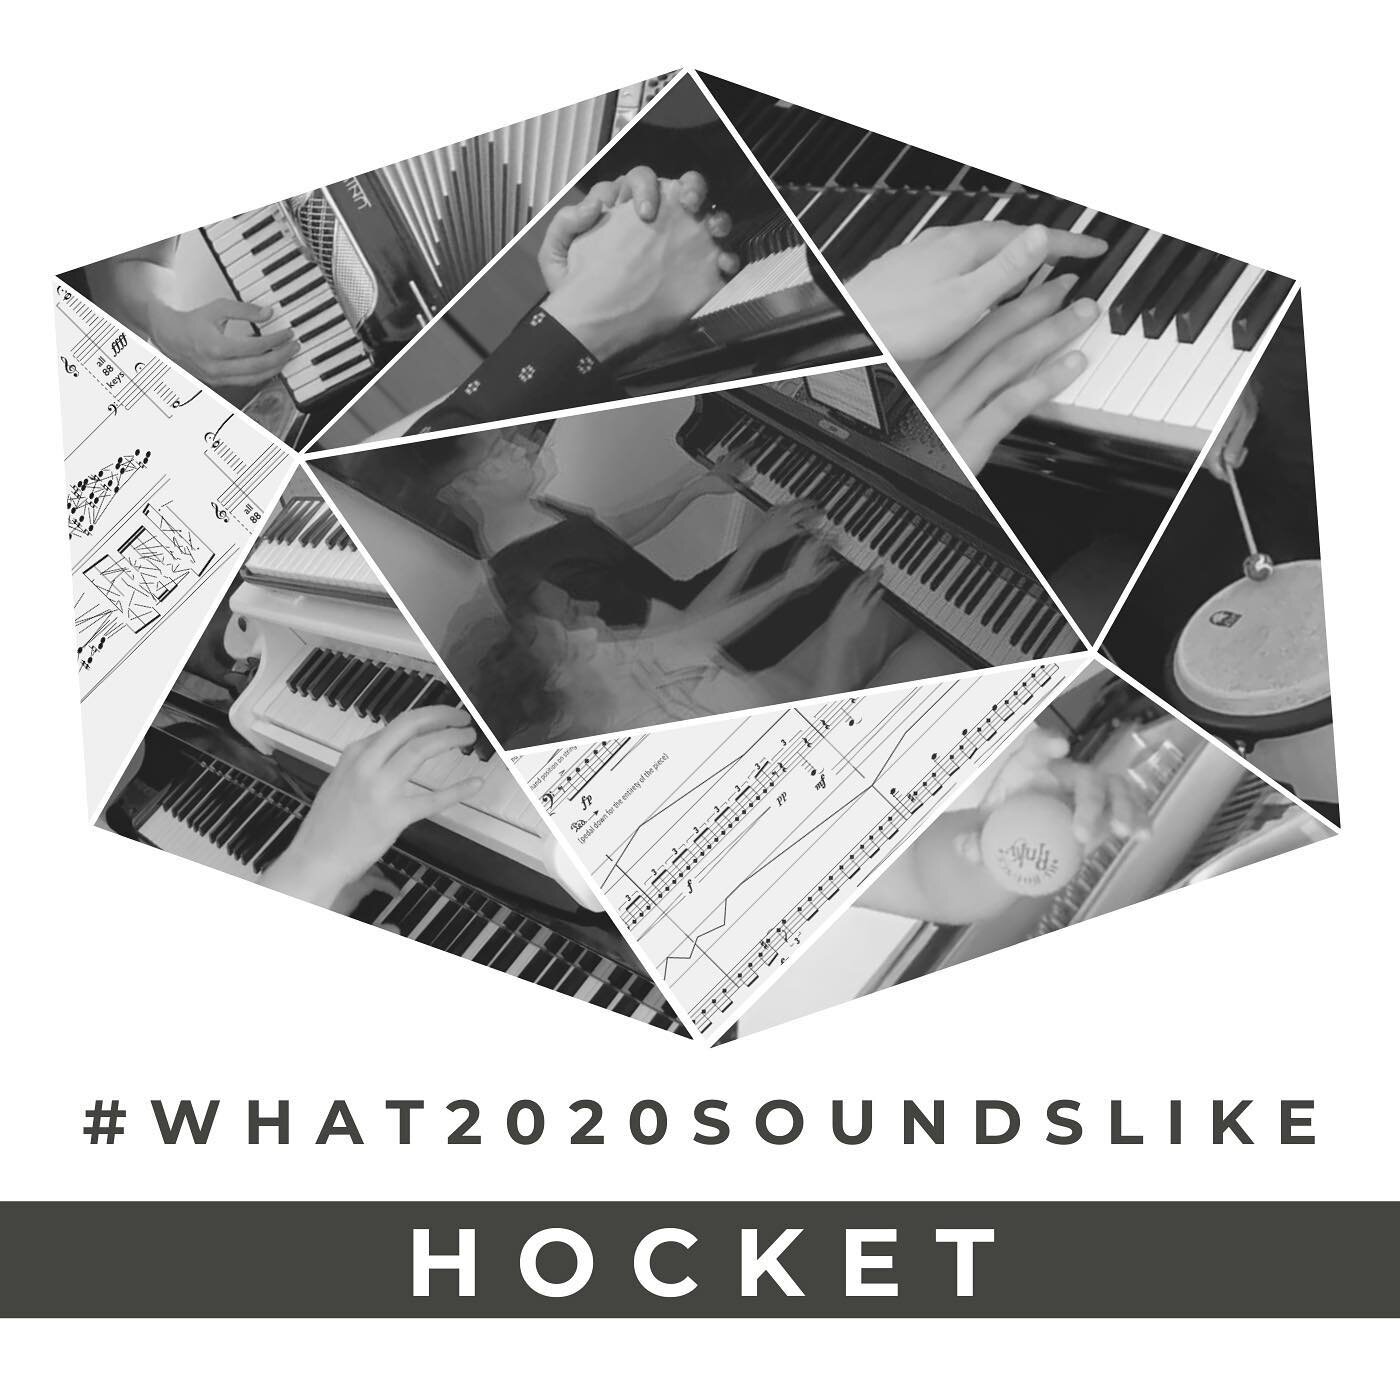 🎉 OUT NOW! 🎉  @hocketensemble&rsquo;s #WHAT2020SOUNDSLIKE album! 💿 Listen on Bandcamp and all music streaming services!⭐️ Link in profile!